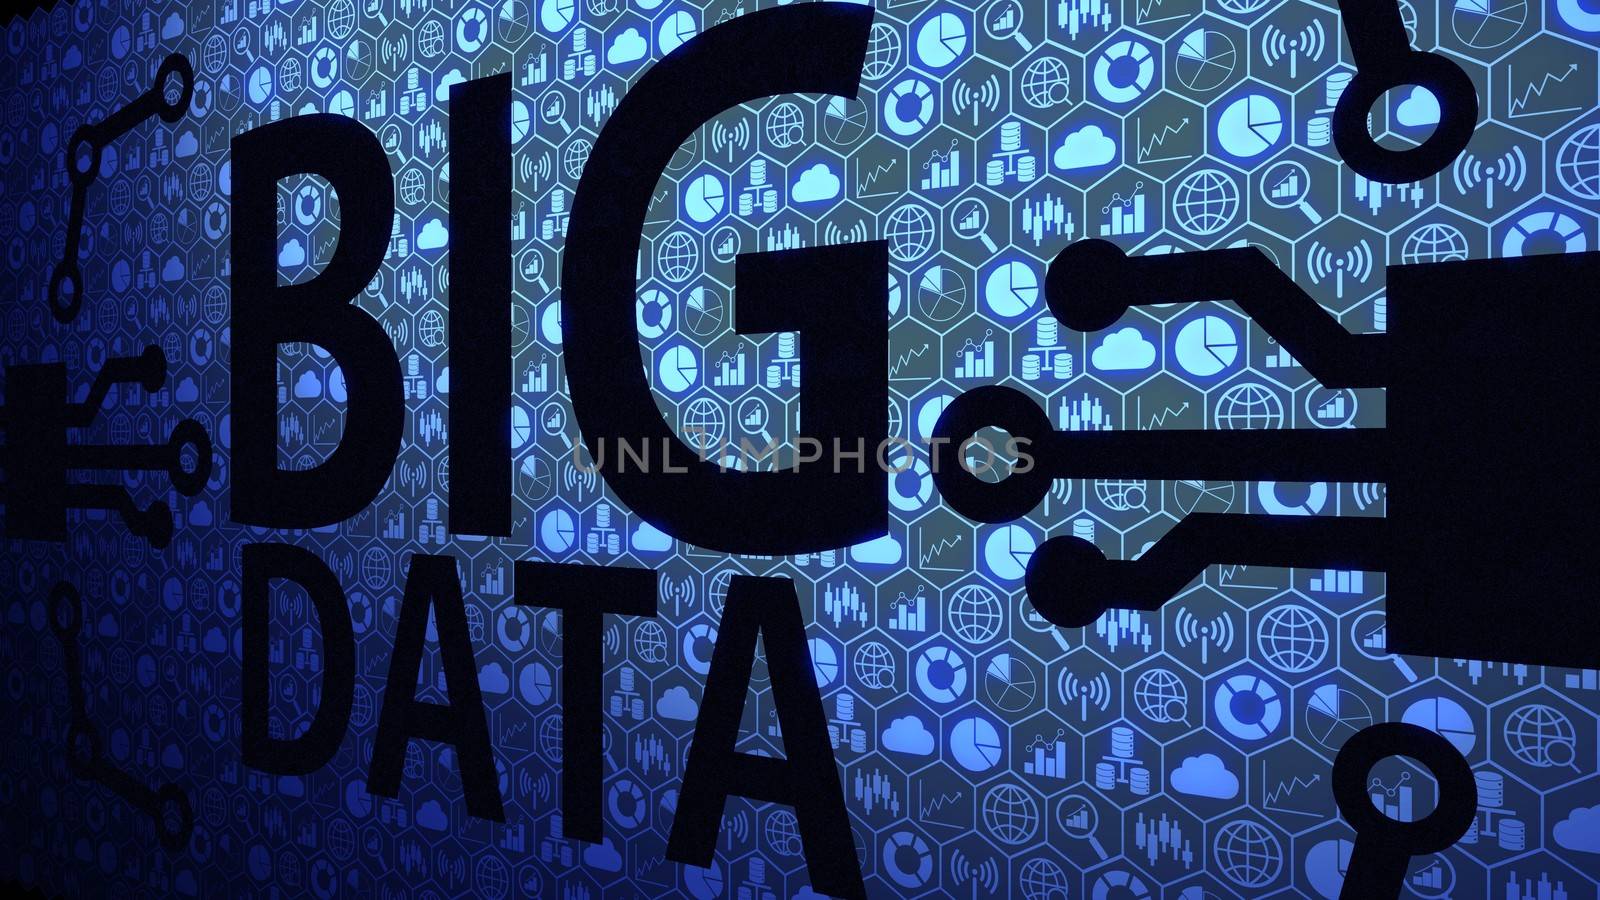 Big Data Big Picture Background Composed of Big Data Icons and Big Data Text with Blue Light Ver.4 of 4 (Different Angle) by ariya23156